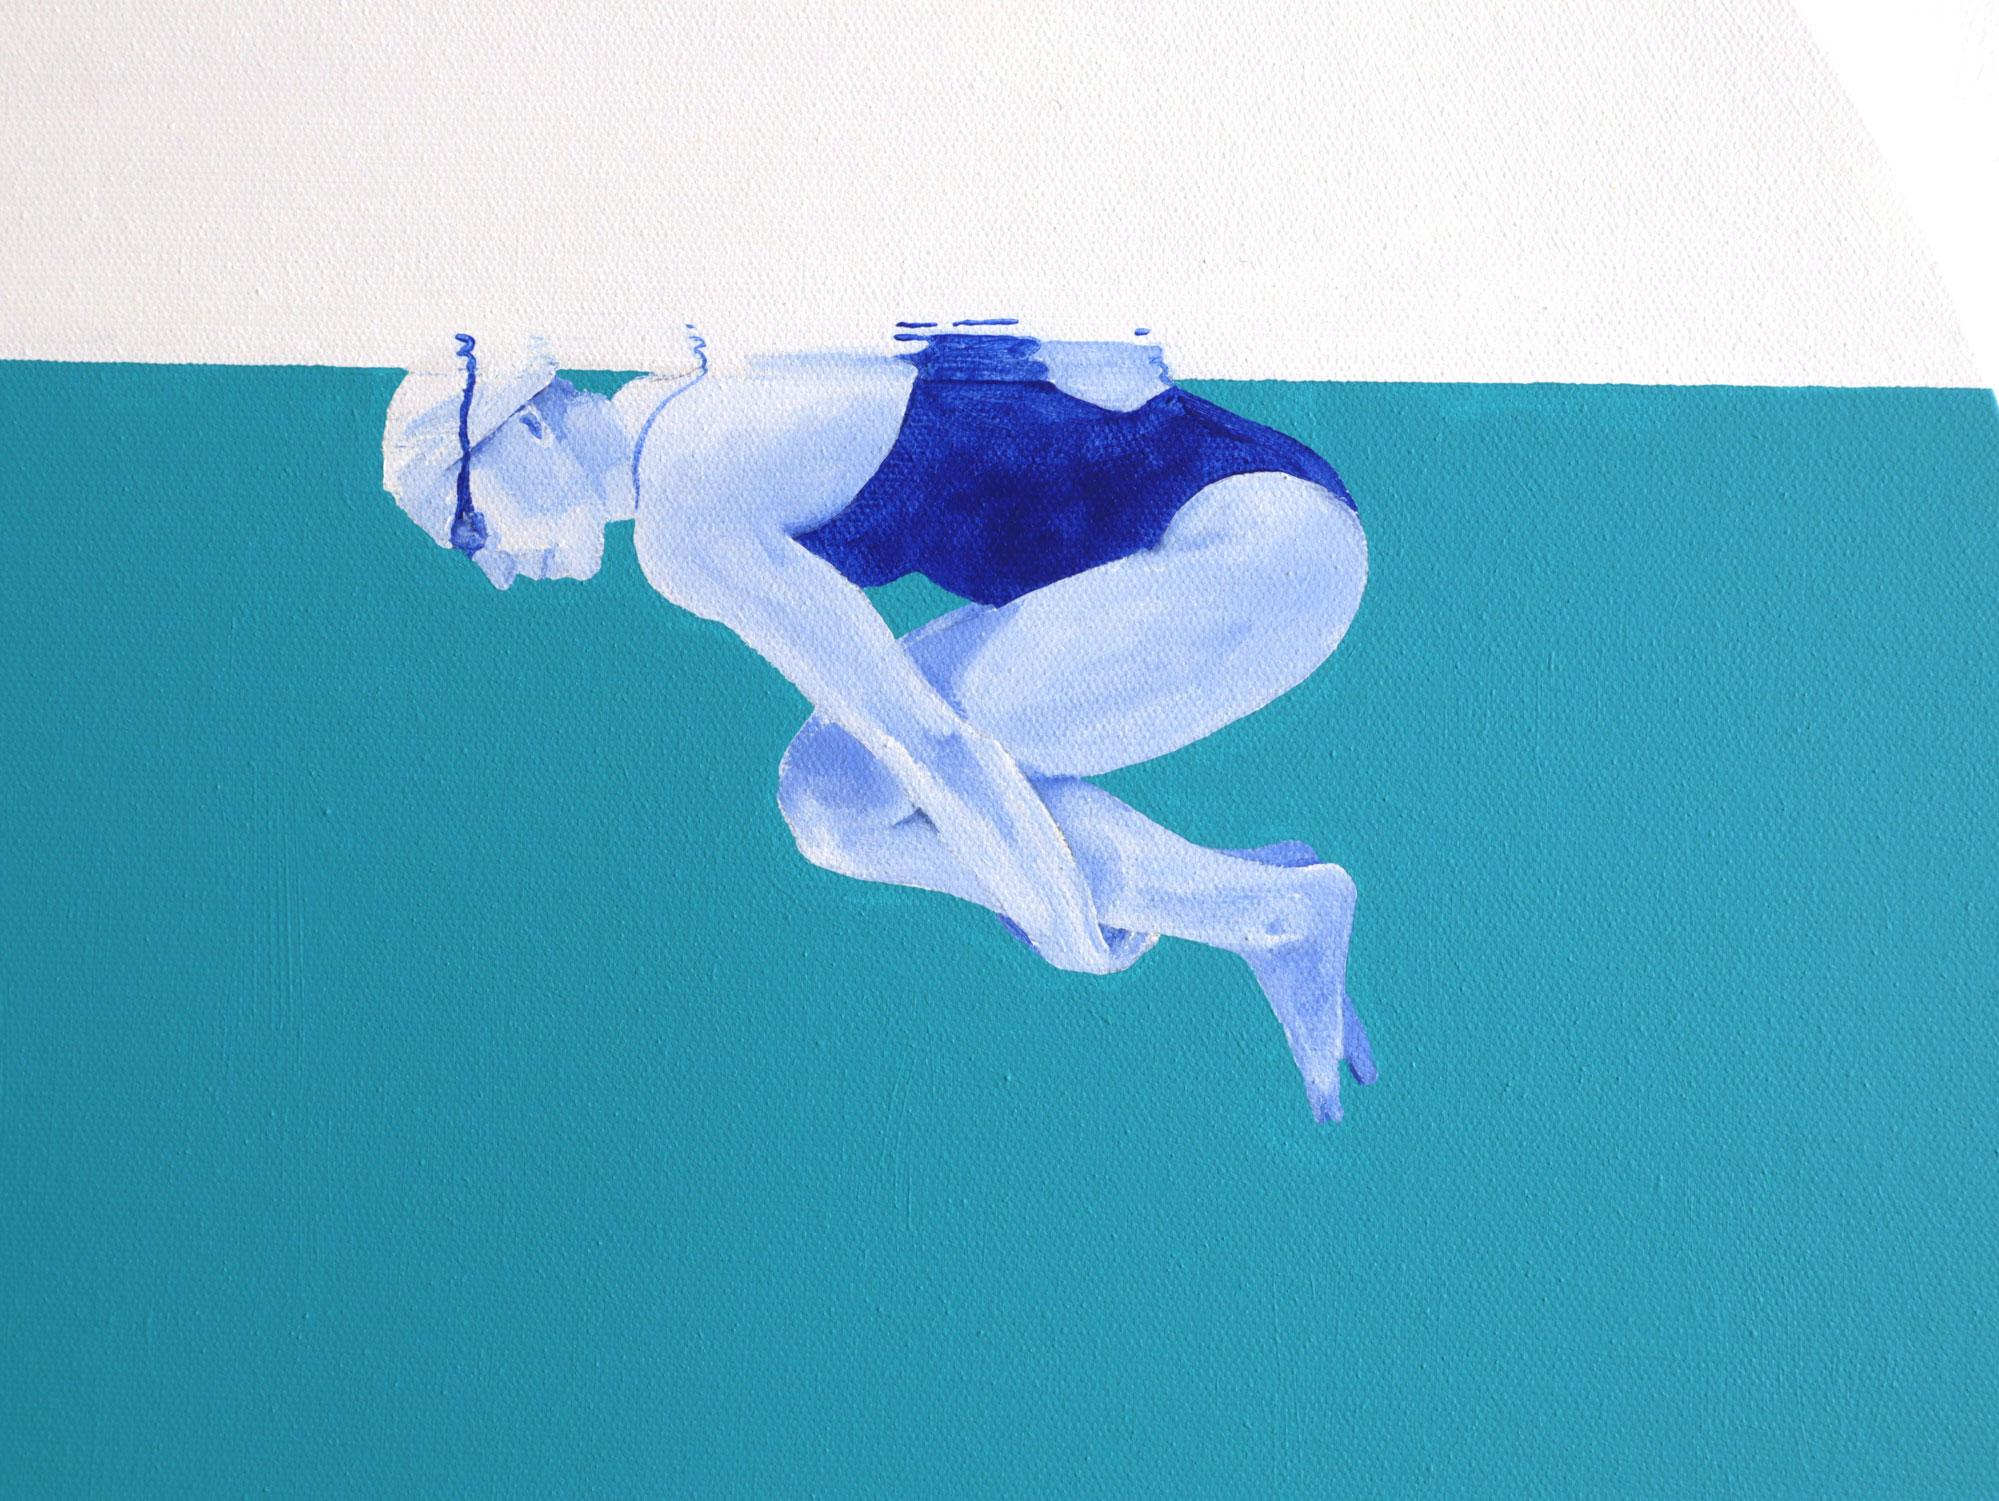 Floating in turquoise - figurative painting, landscape painting - Minimalist Painting by Ana Patitu